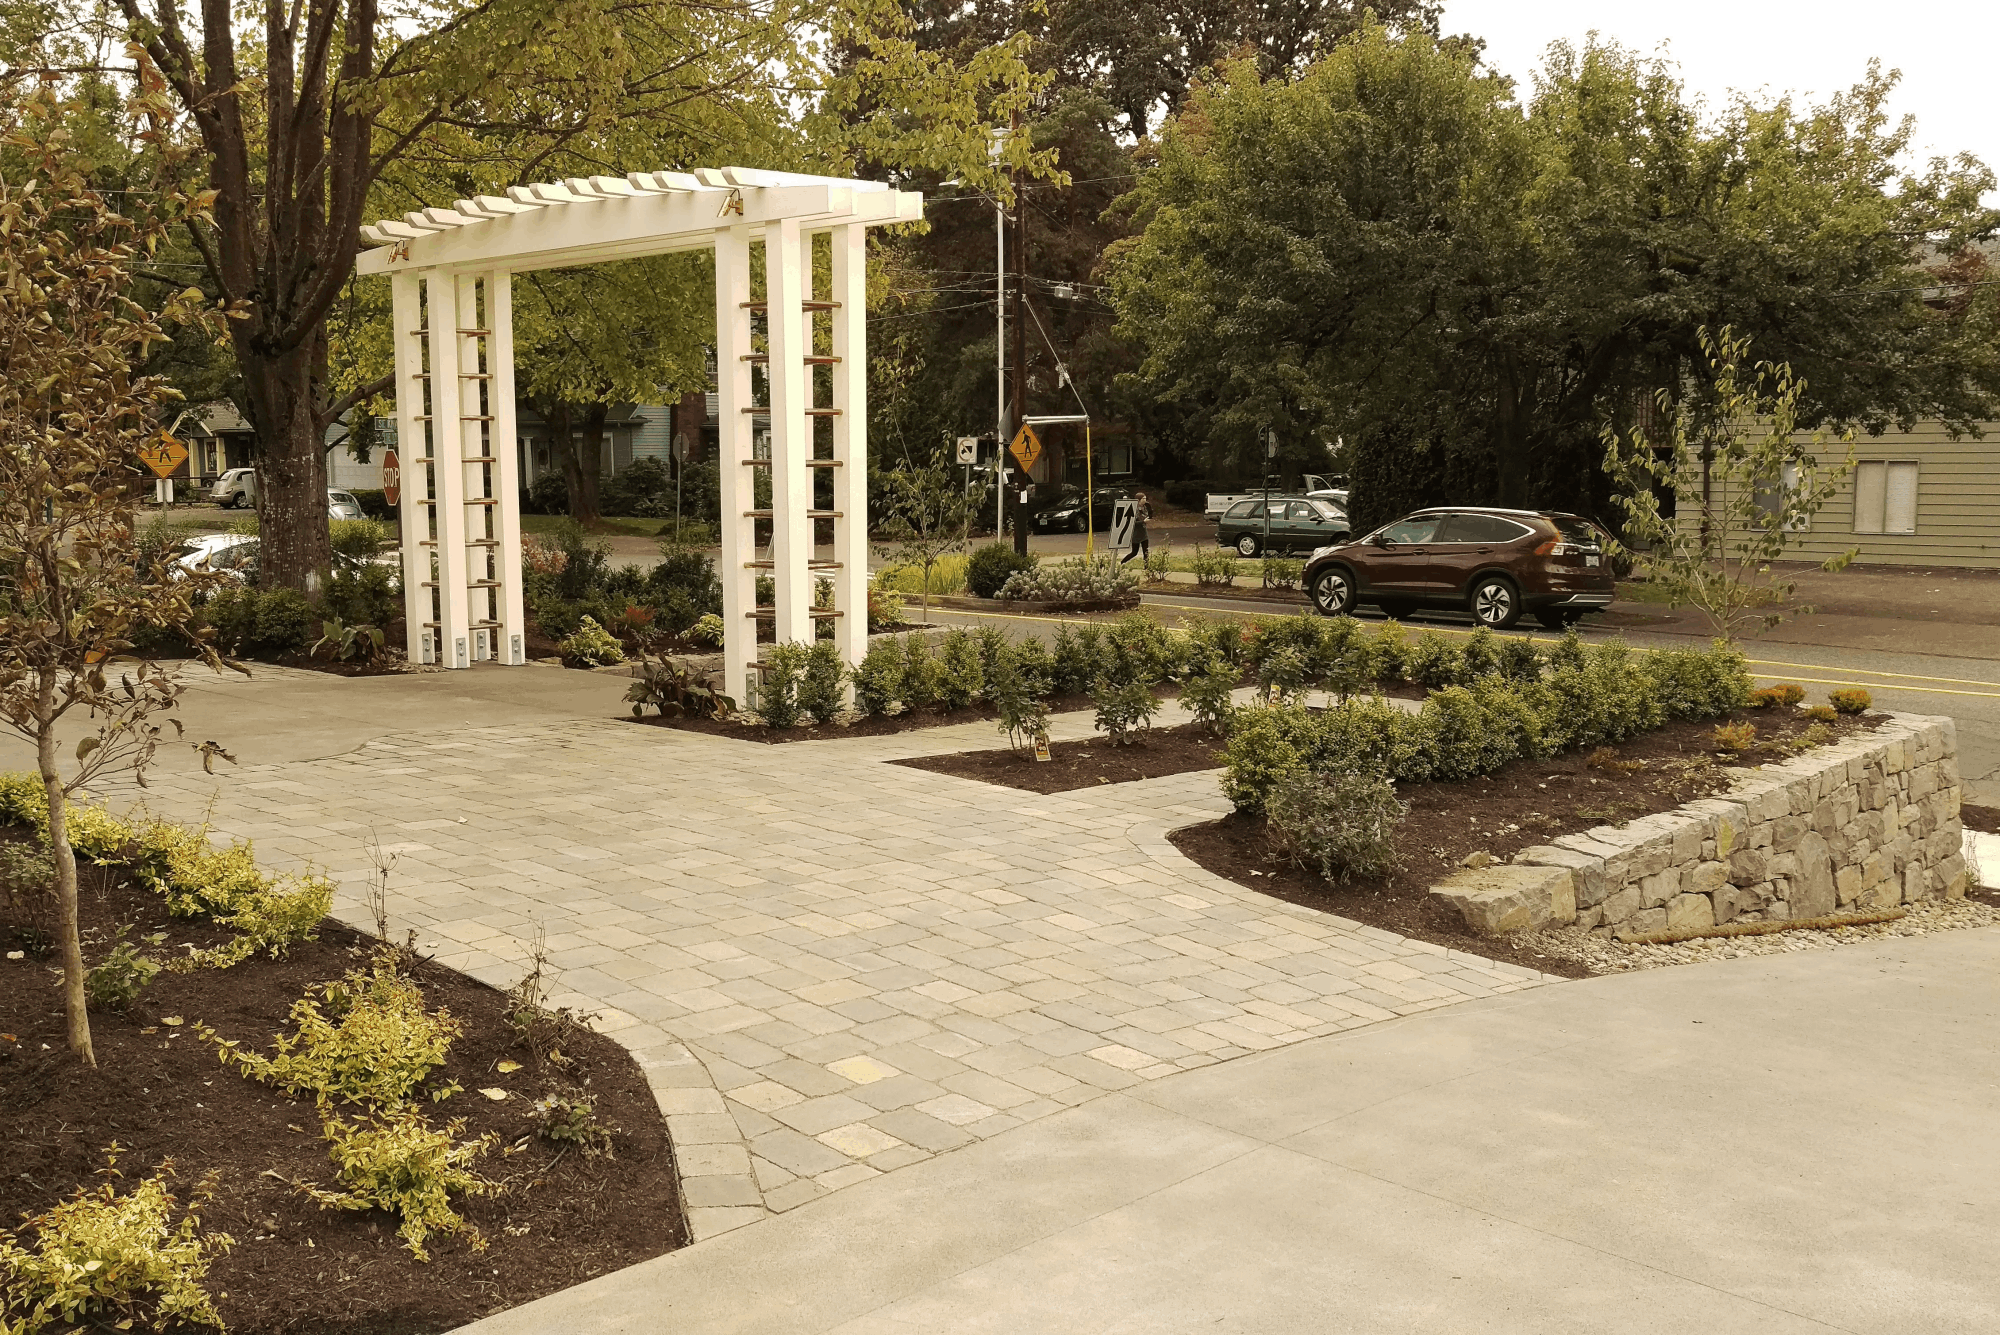 This hardscape leading up to a classic outdoor structure brings a touch of class.